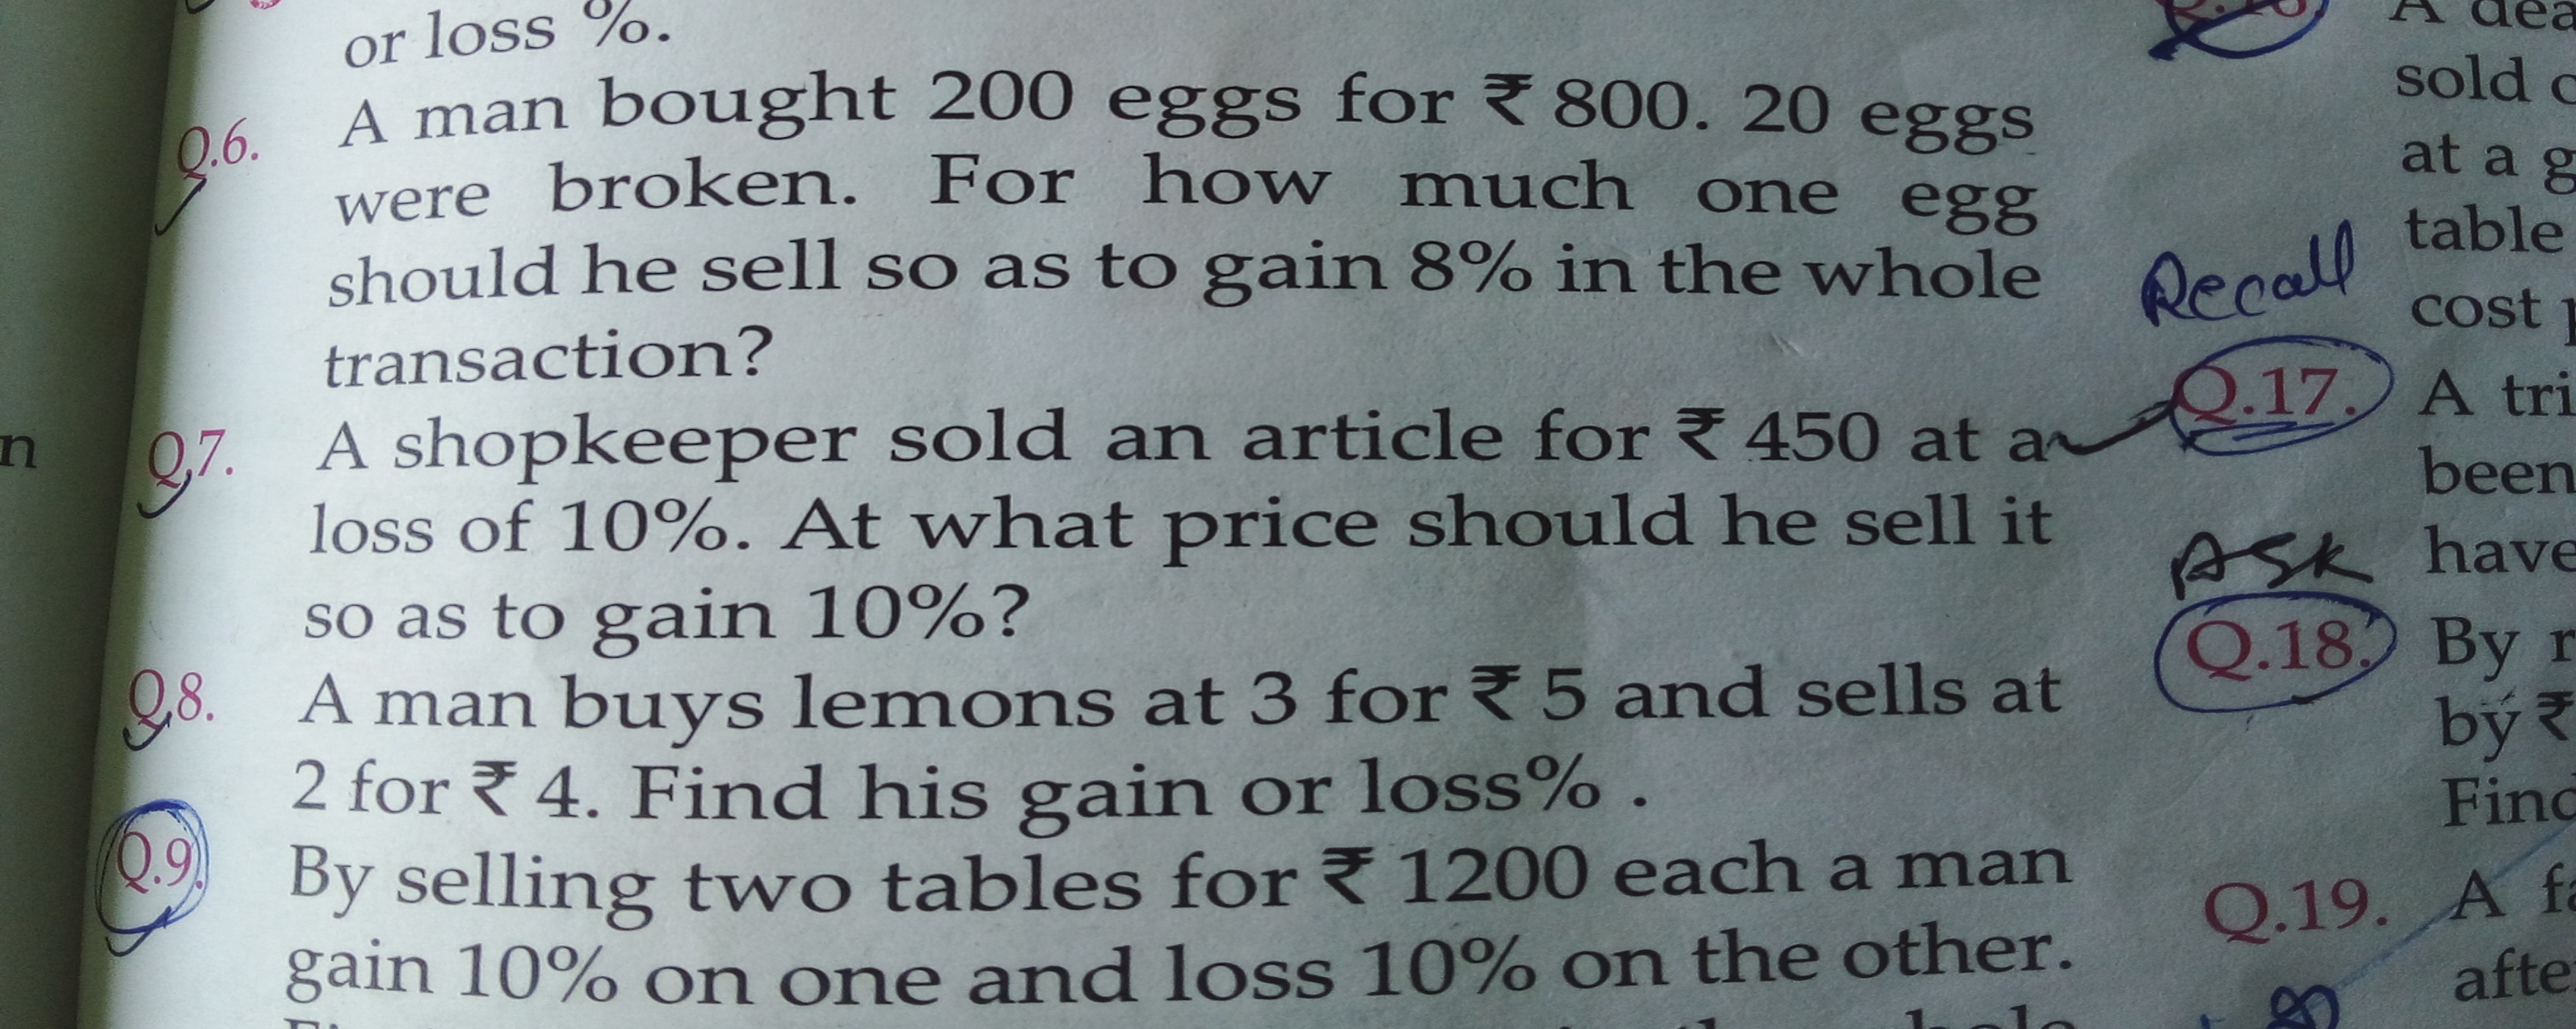 Q.6. A man bought 200 eggs for ₹ 800.20 eggs were broken. For how much